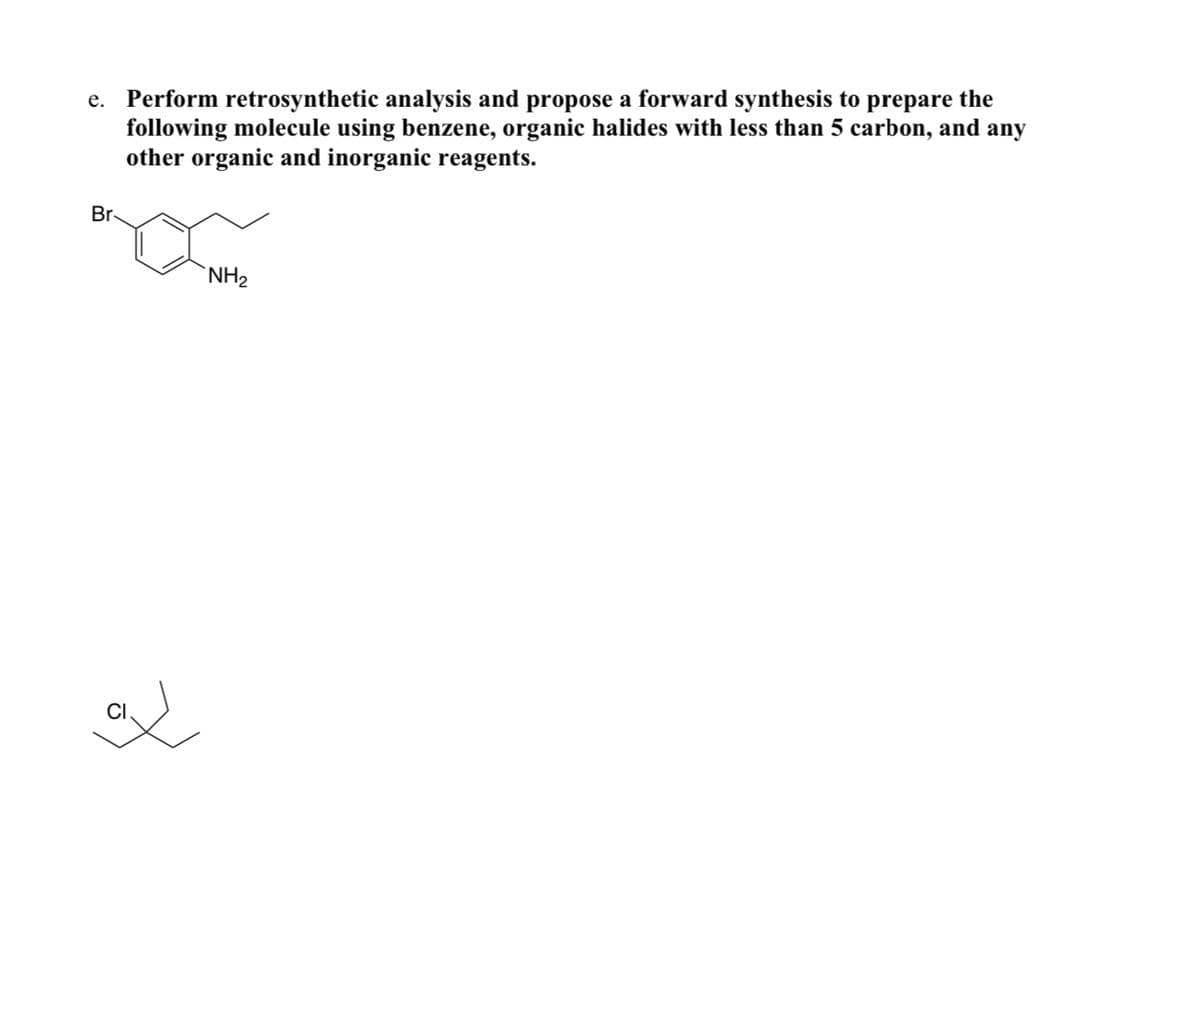 e. Perform retrosynthetic analysis and propose a forward synthesis to prepare the
following molecule using benzene, organic halides with less than 5 carbon, and any
other organic and inorganic reagents.
Br
NH2
CI